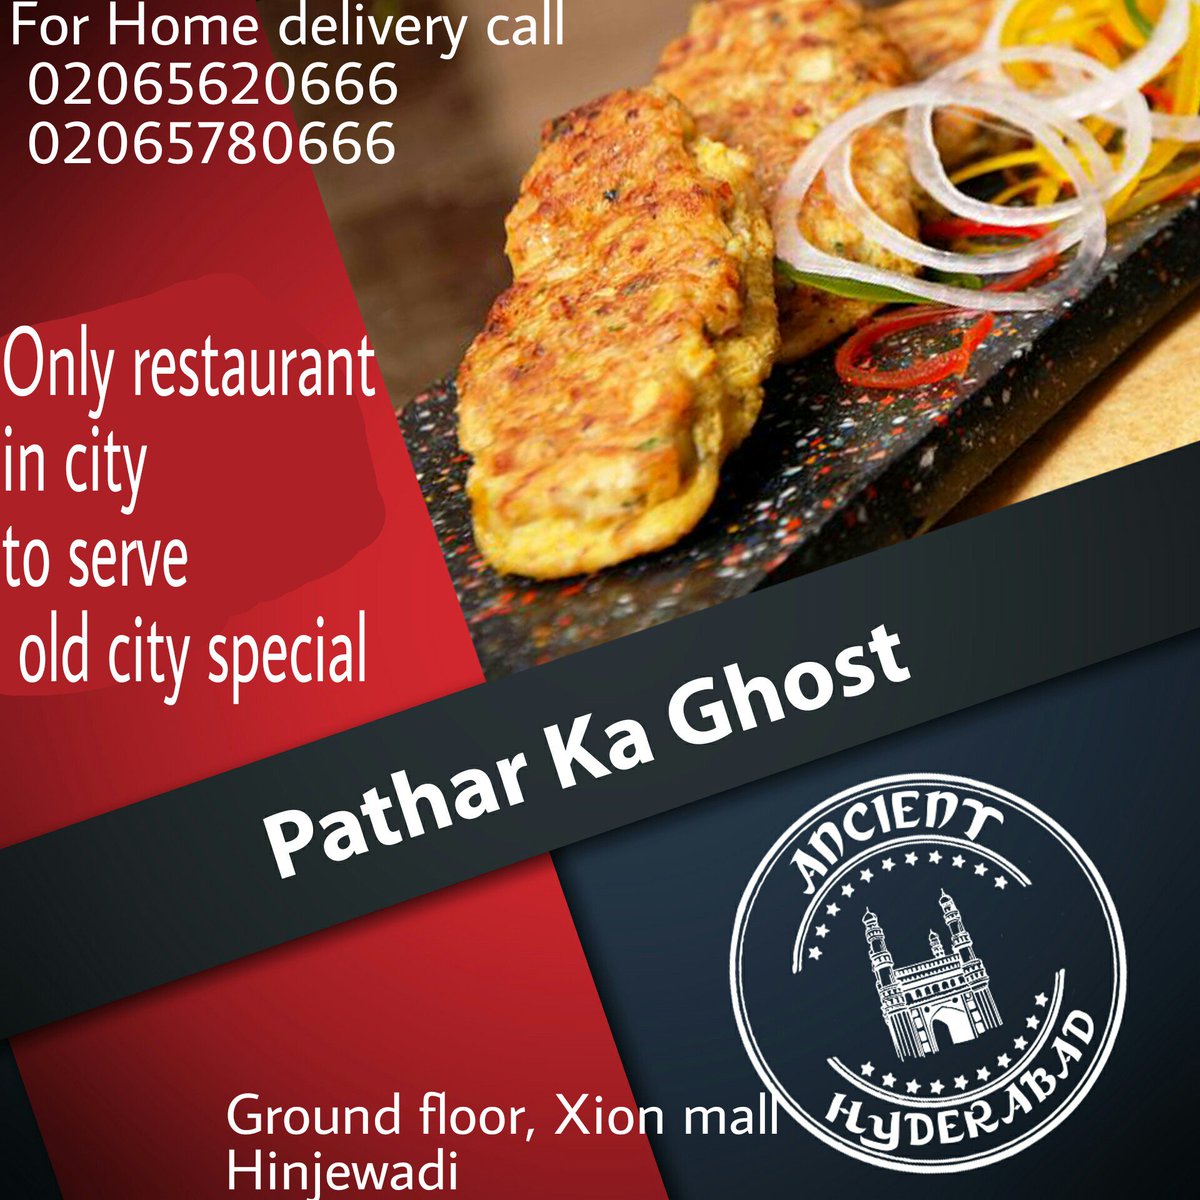 ly #restaurant in #pune 2 serv Old city special #patharkaghost #ancienthyderabad #hinjewadi #wakad #punefoodlovers